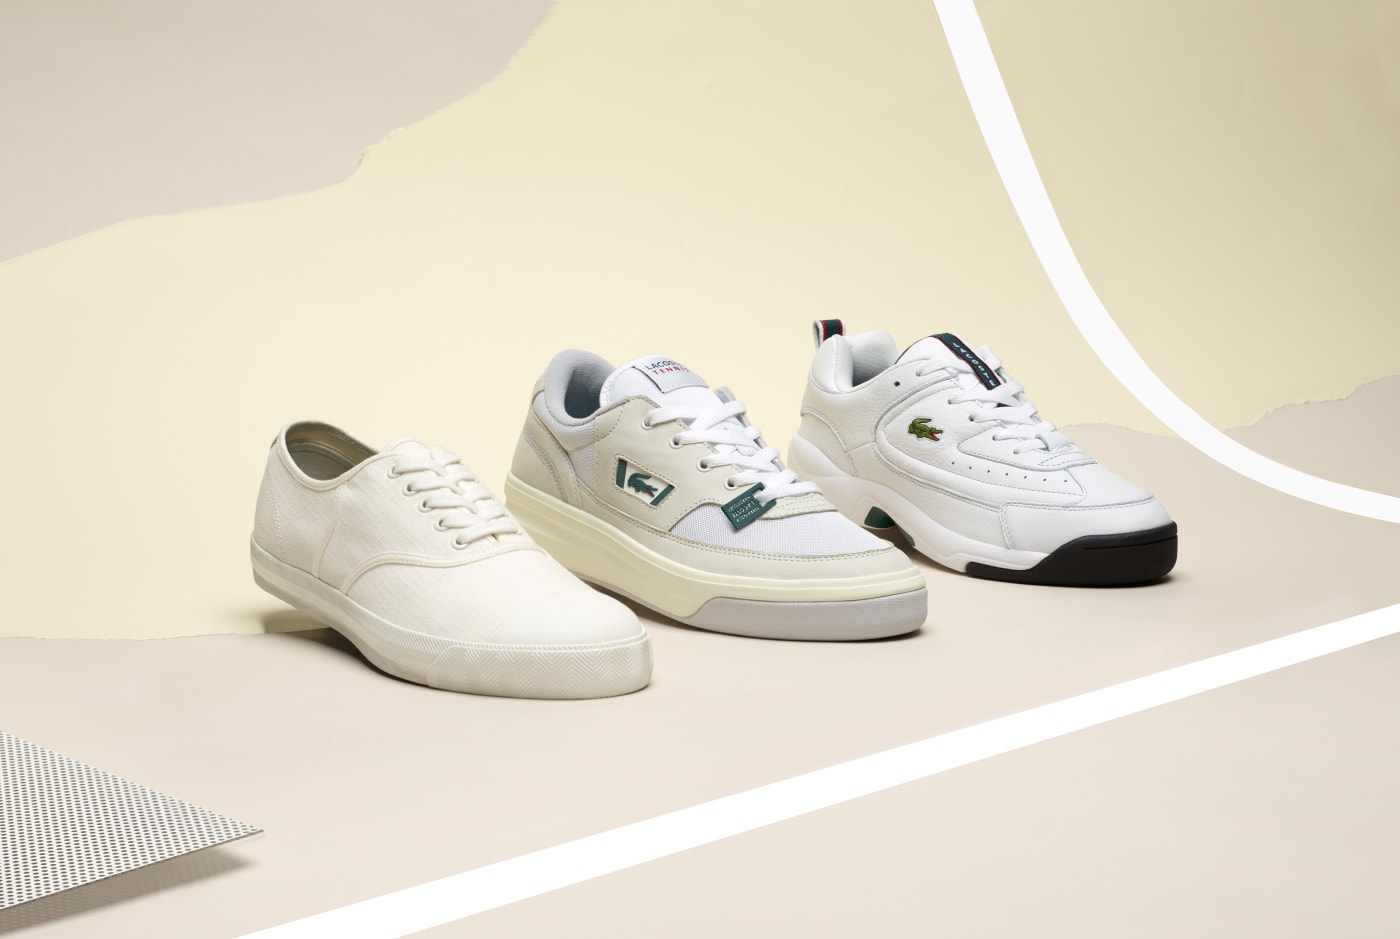 lacoste heritage collection